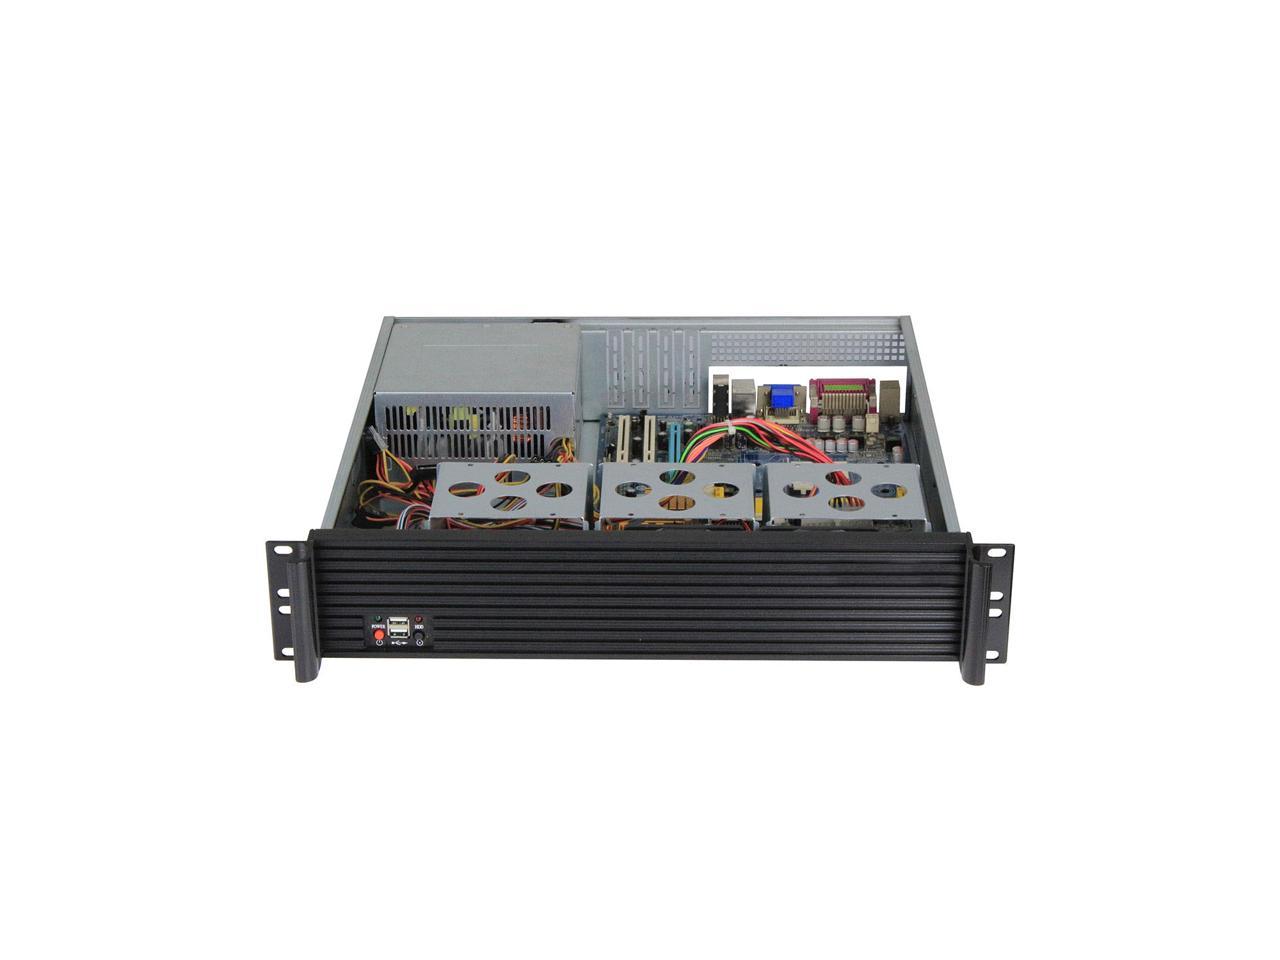 2U Server Chassis, Standard 19-Inch Rack-Mounted Server Chassis, Front Panel, Mounting Ears And